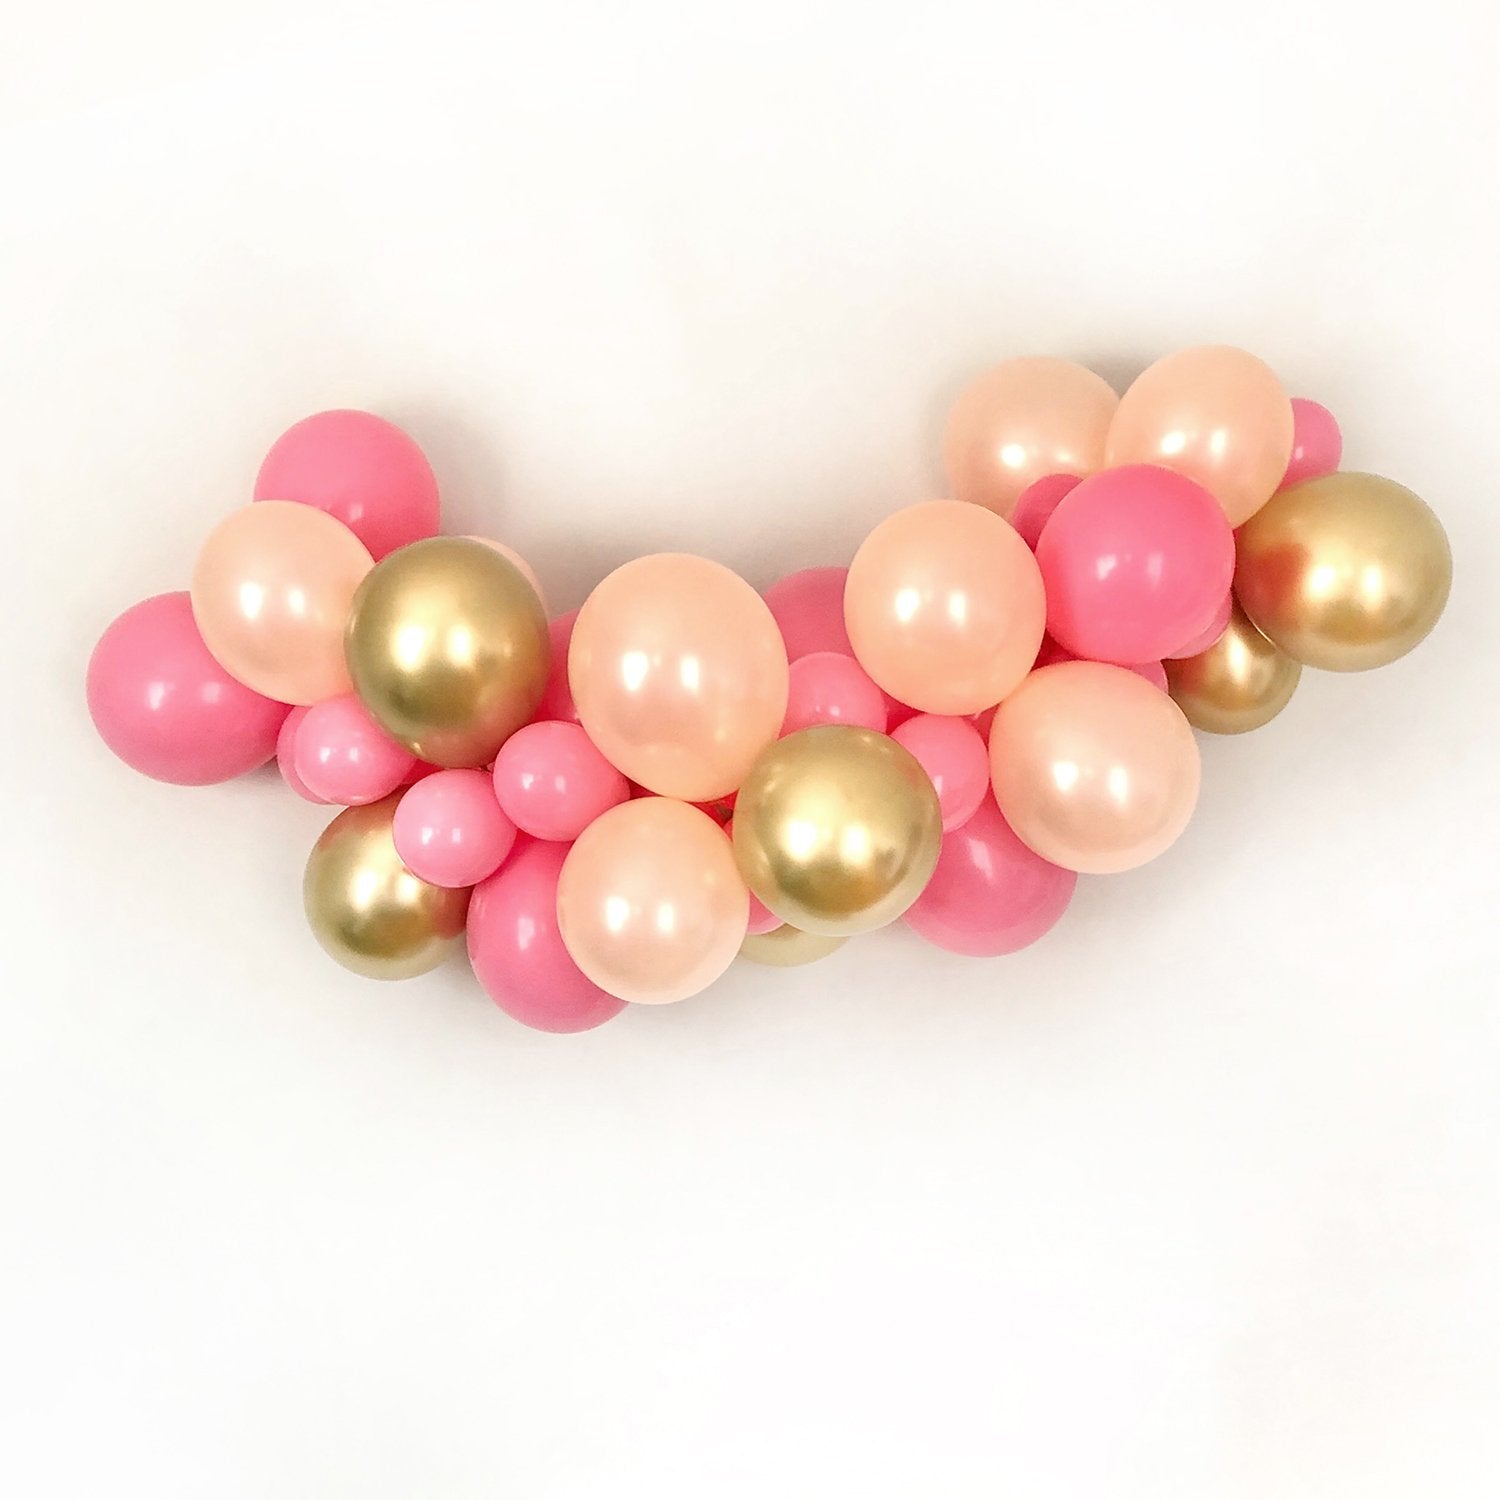 Pastel Christmas Balloon Garland Kit - Pretty Collected